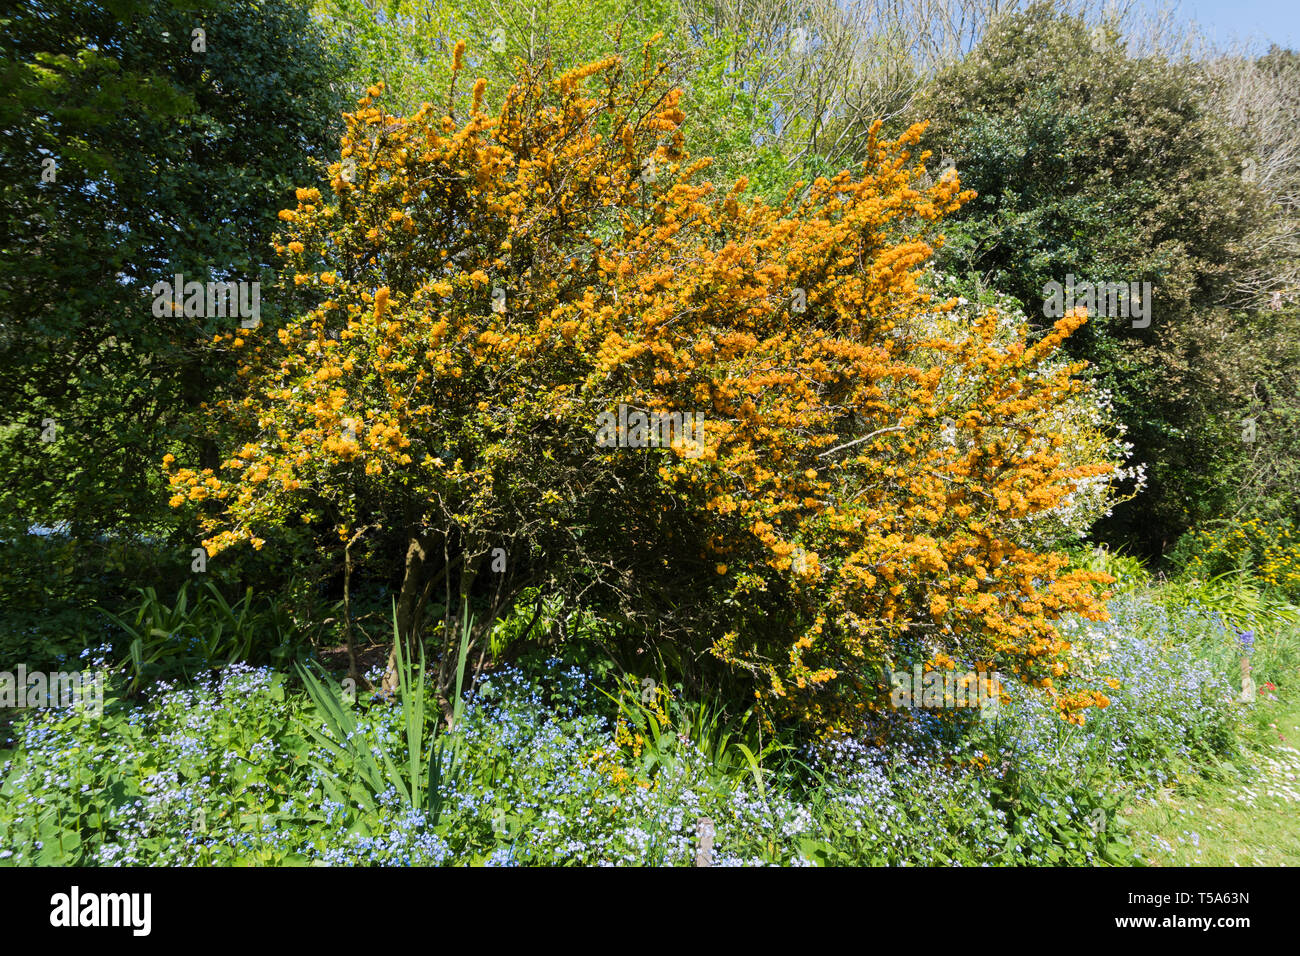 Berberis darwinii (Darwin's barberry) evergreen shrub with orange flowers and spine-toothed leaves in Spring (April) in West Sussex, England, UK. Stock Photo